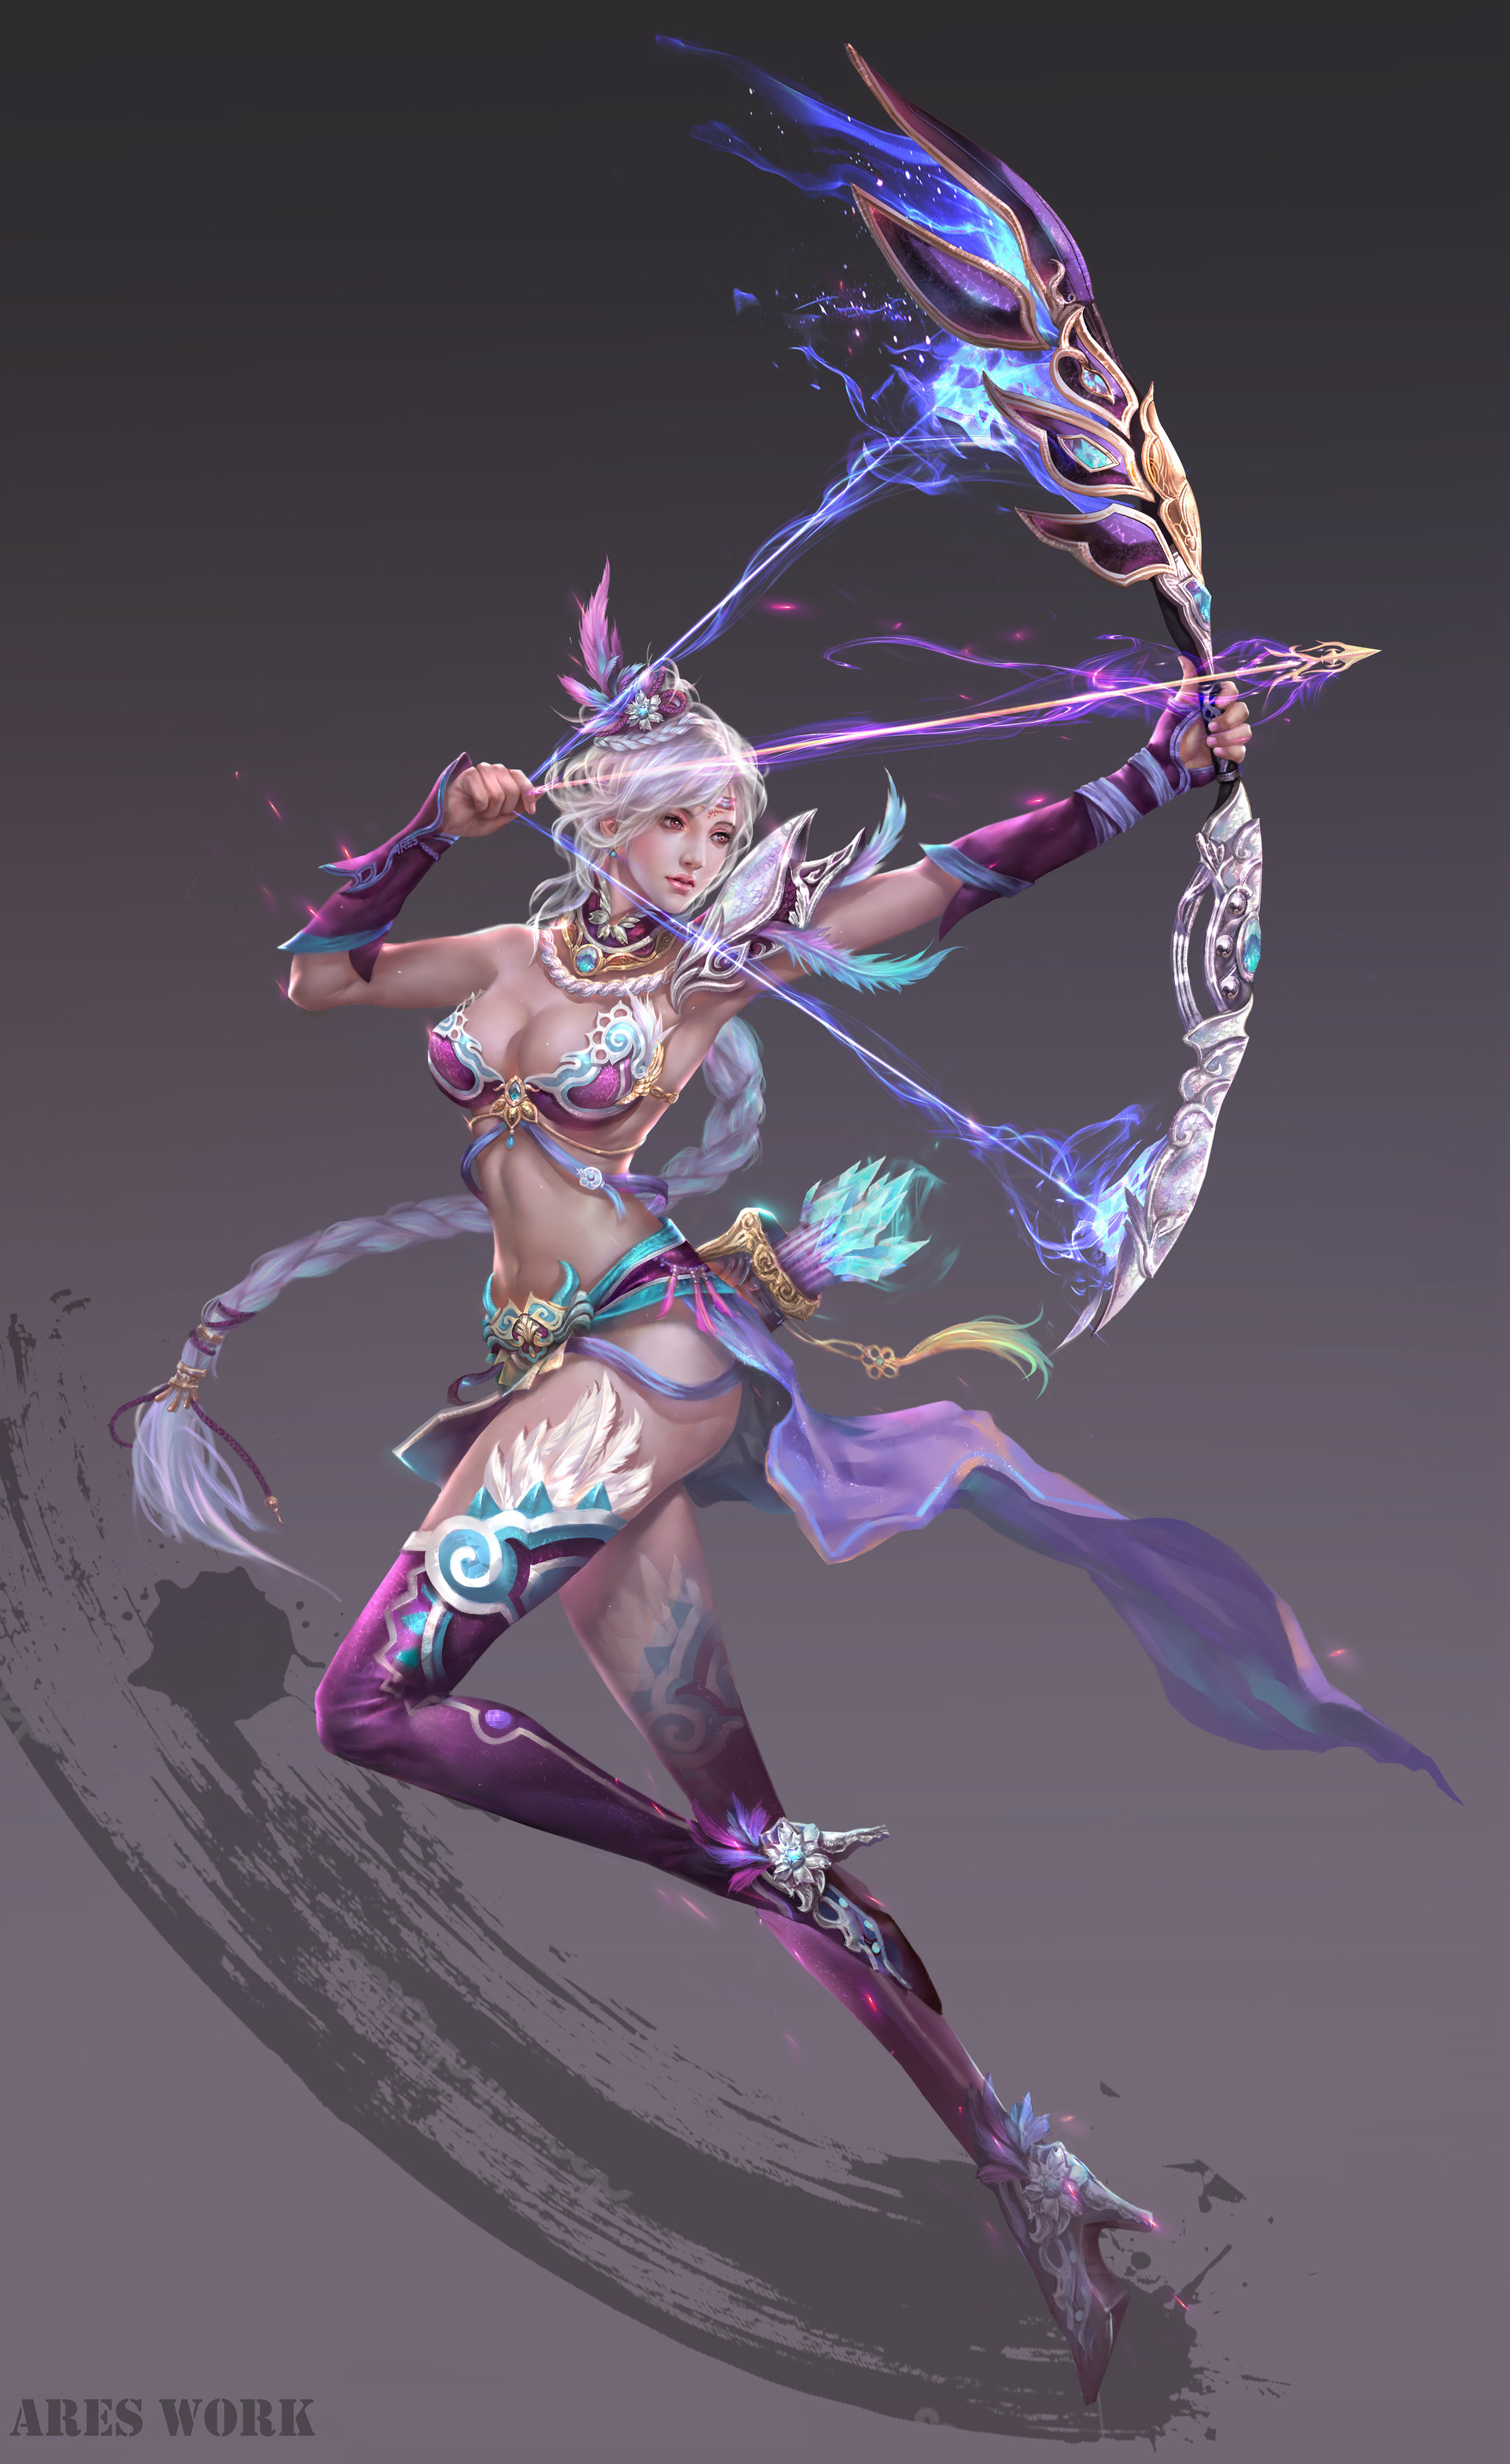 General 1920x3133 drawing women archer hair accessories feathers glowing purple elbow gloves armor skimpy clothes aiming bow arrows thigh-highs high heels fighting simple background silver hair magic Ares (artist)